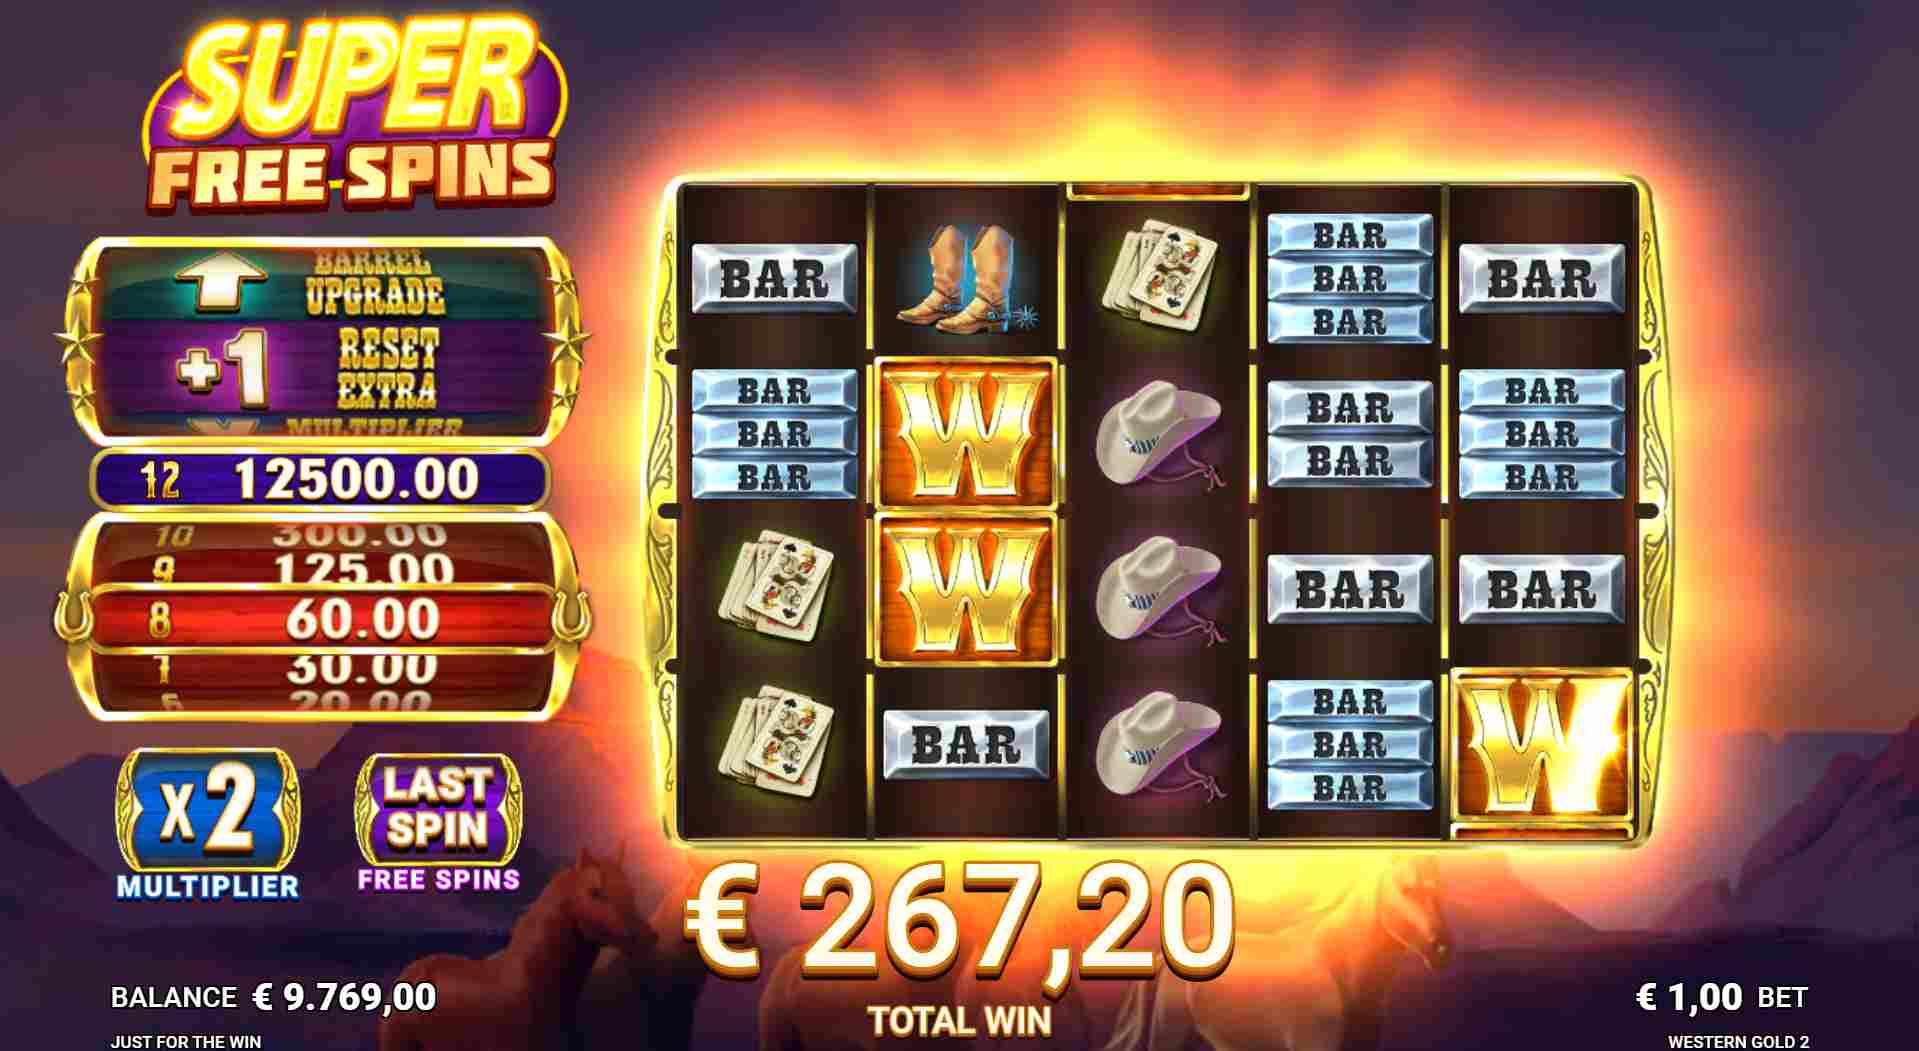 Western Gold 2 Free Spins